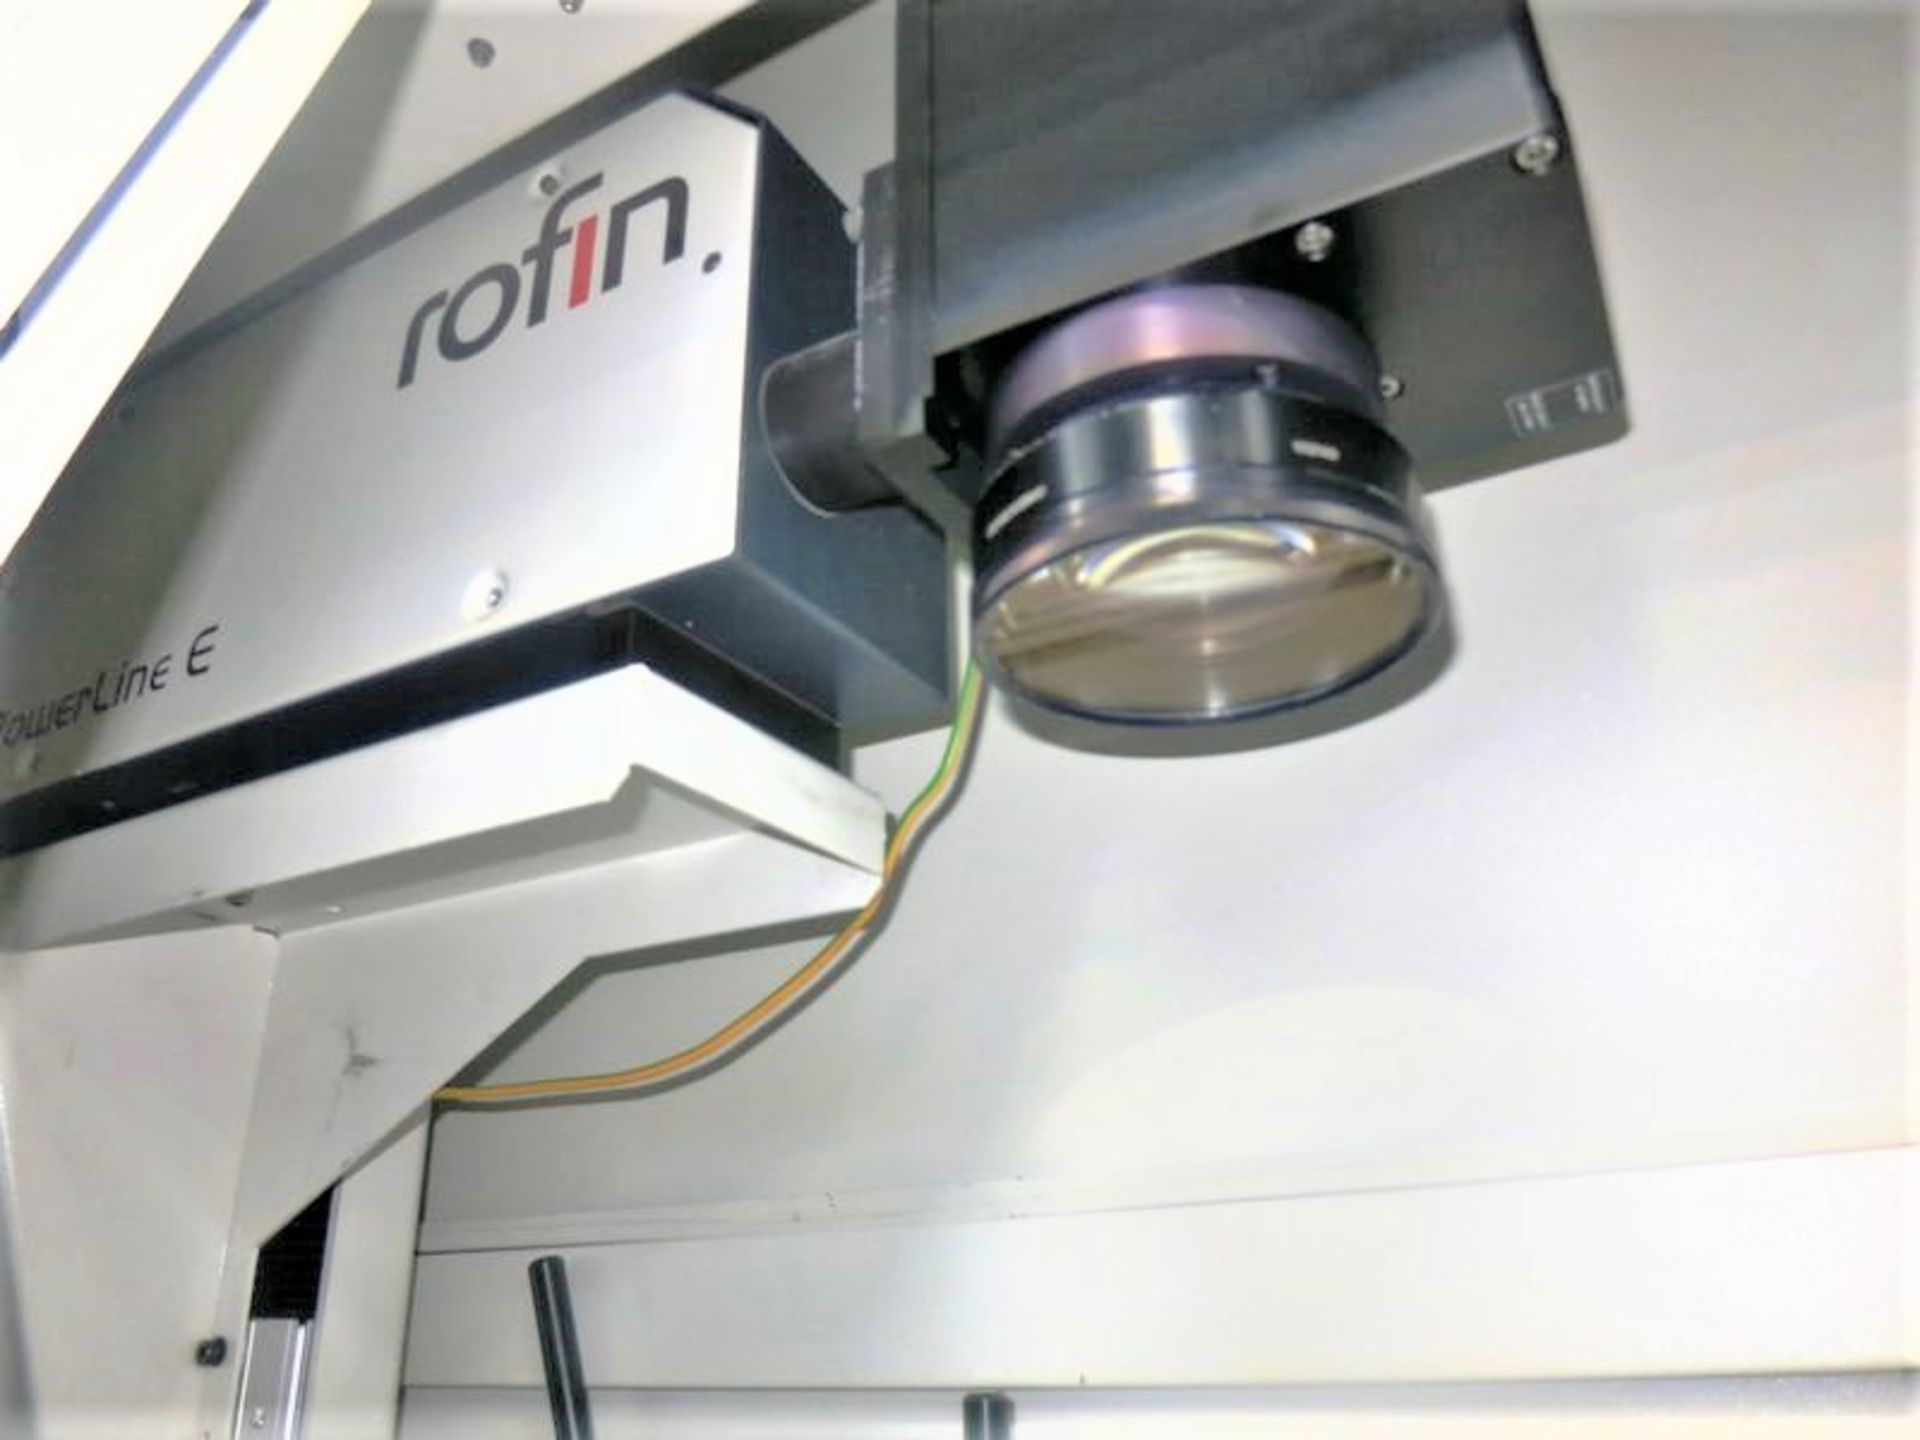 Rofin Starmark SLM 10E Fully Programmable CNC Laser Marking System w/Rotary Table for Cylindrical - Image 4 of 13